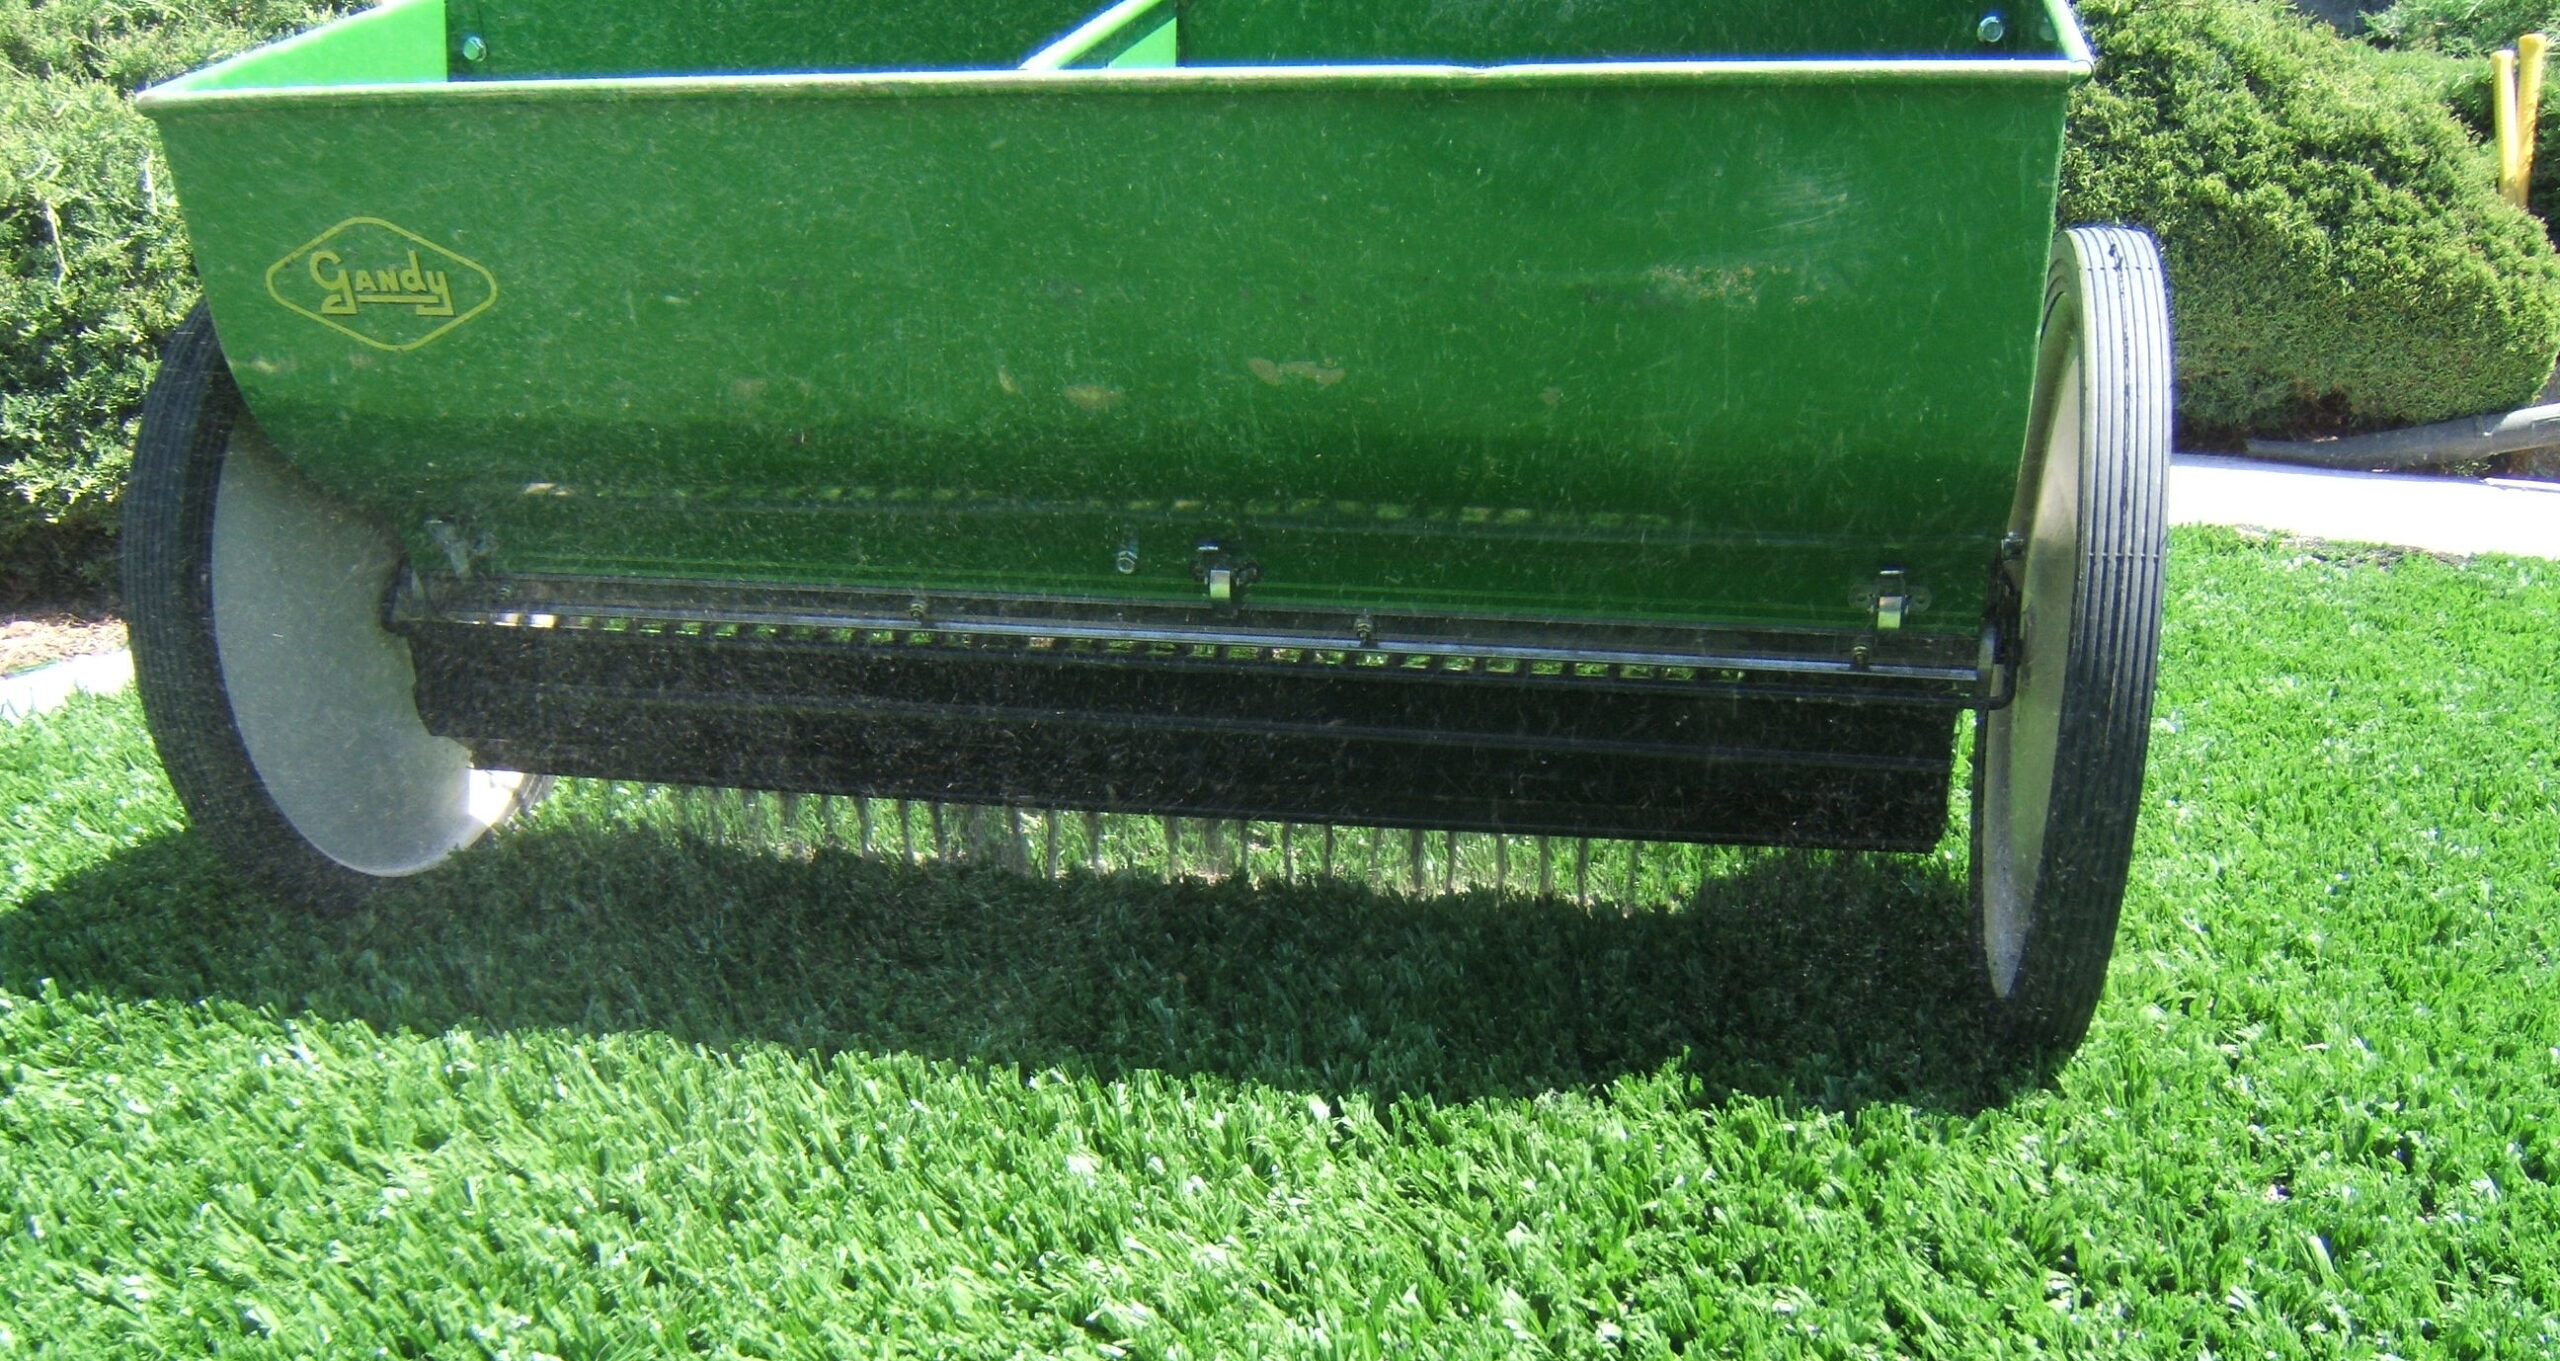 Infill for Artificial Grass: Everything You Need to Know